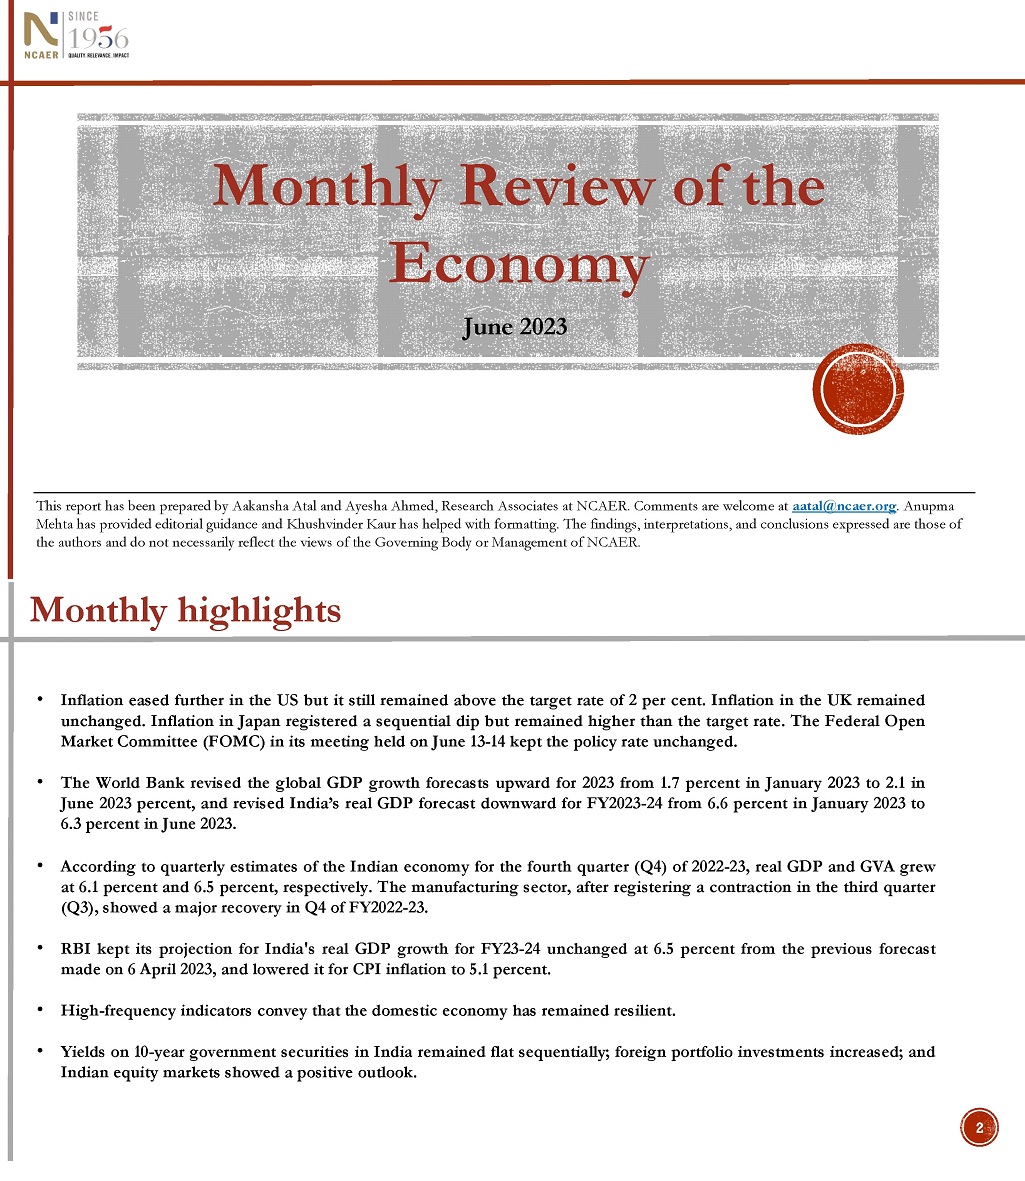 Monthly Review of the Economy: June 2023